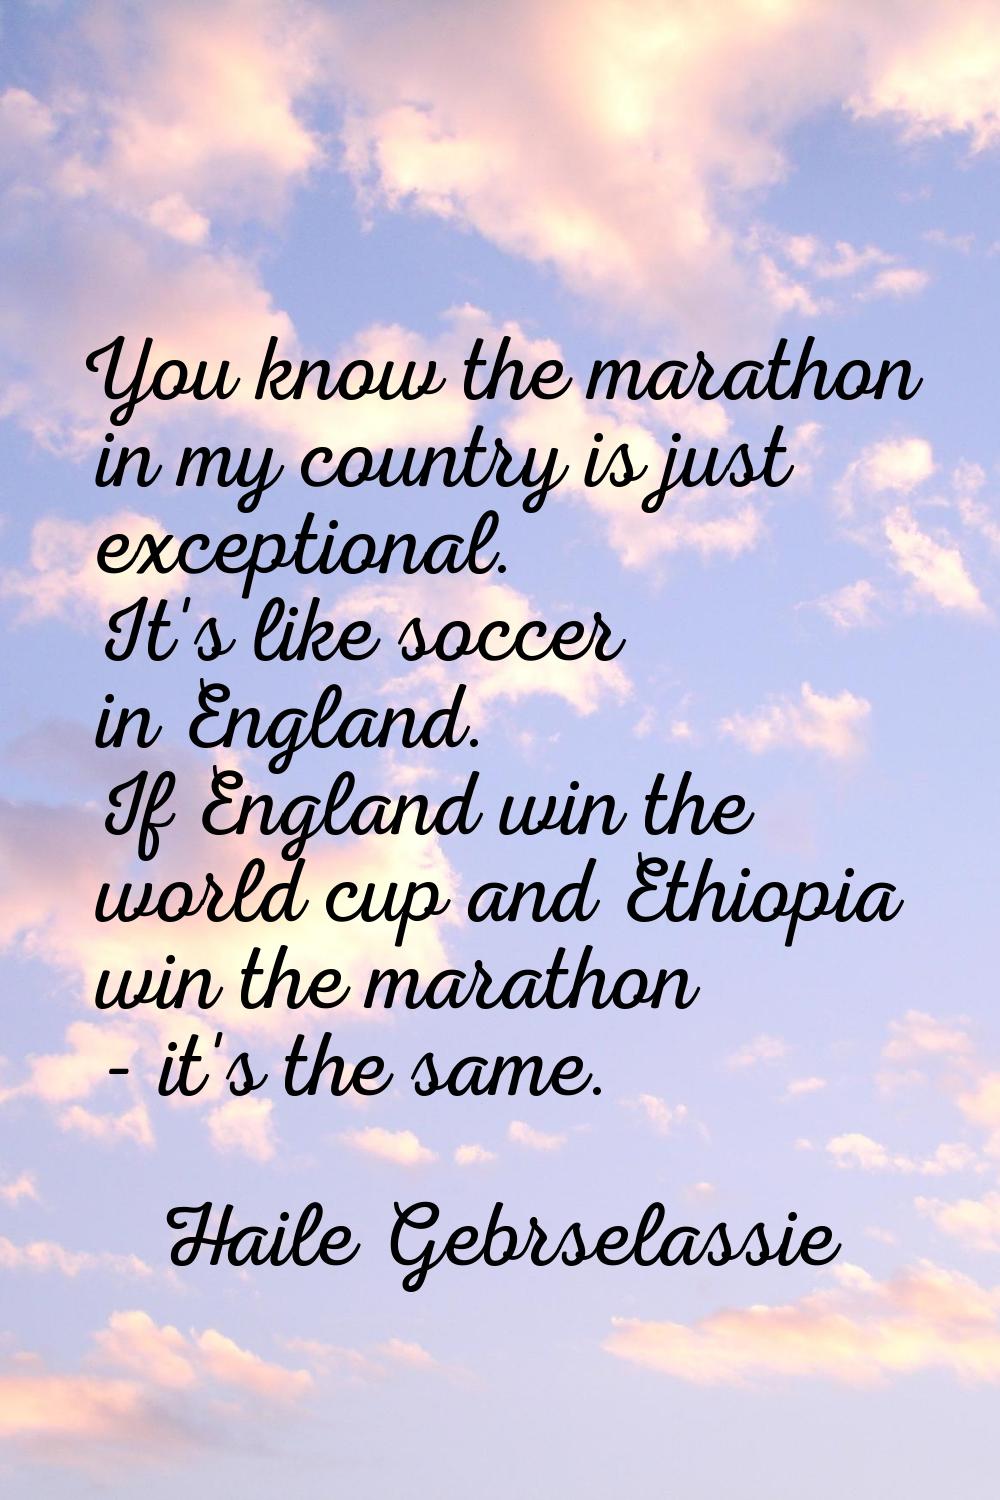 You know the marathon in my country is just exceptional. It's like soccer in England. If England wi